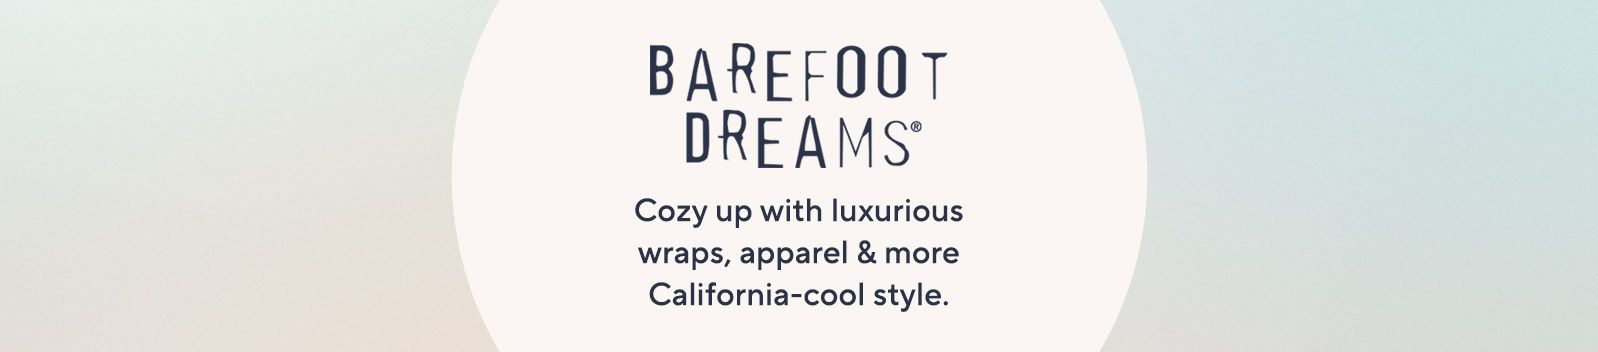 Barefoot Dreams.  Cozy up with luxurious wraps, apparel & more California-cool style.